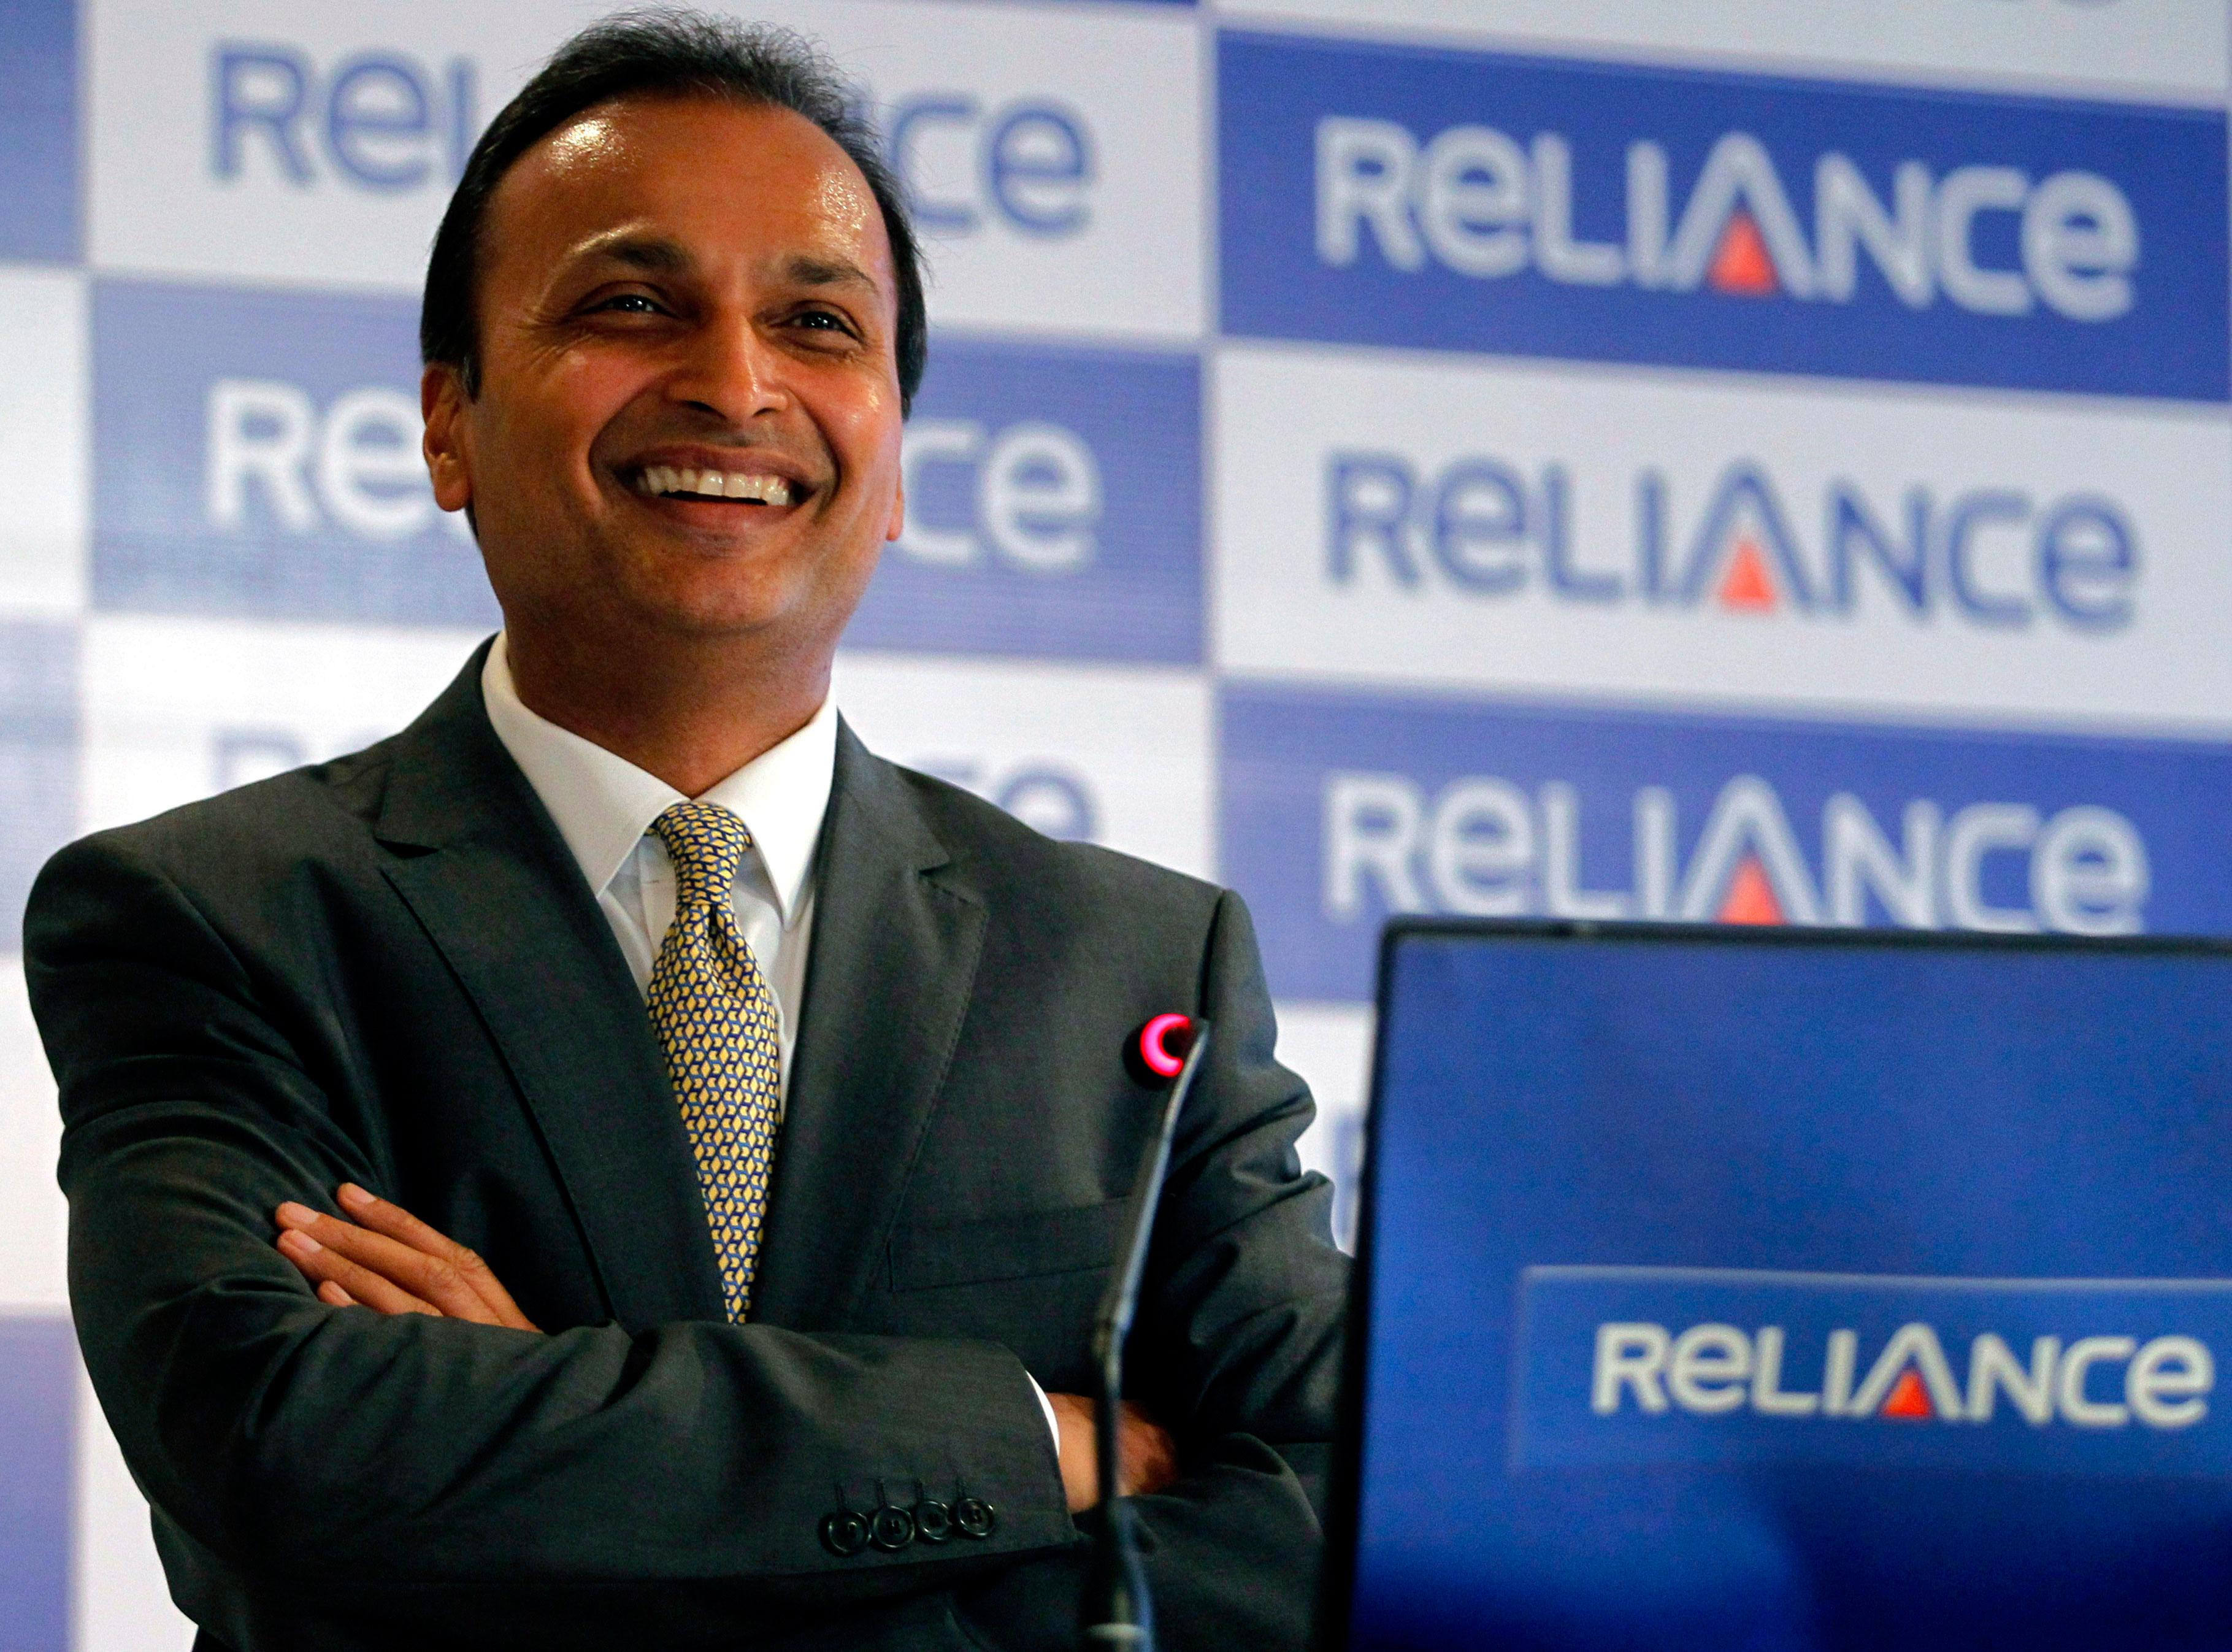 Reliance Communications in talks to acquire Russian firm Sistema’s Indian telecom unit